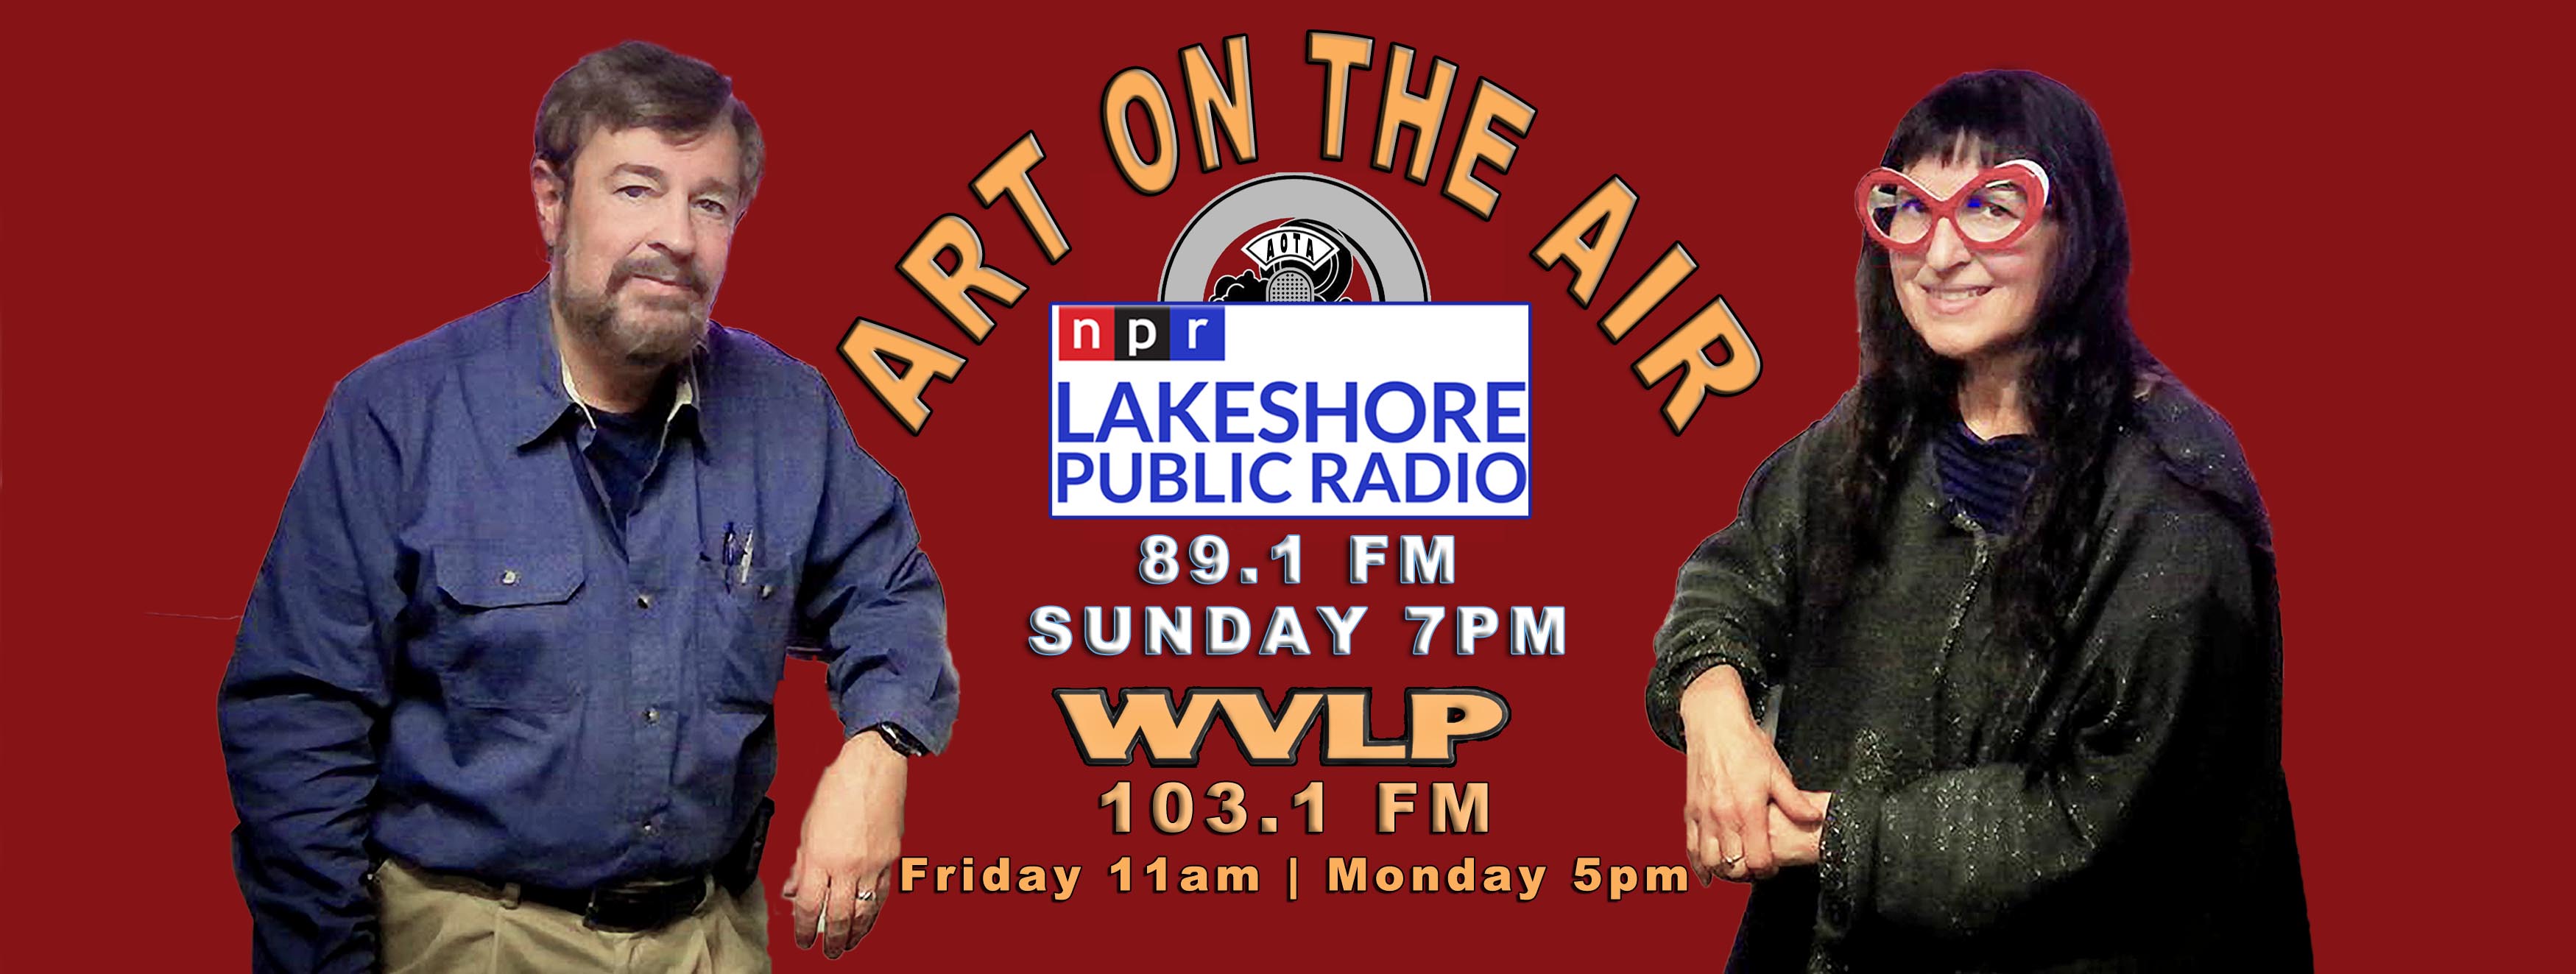 Art On The Air Hosts